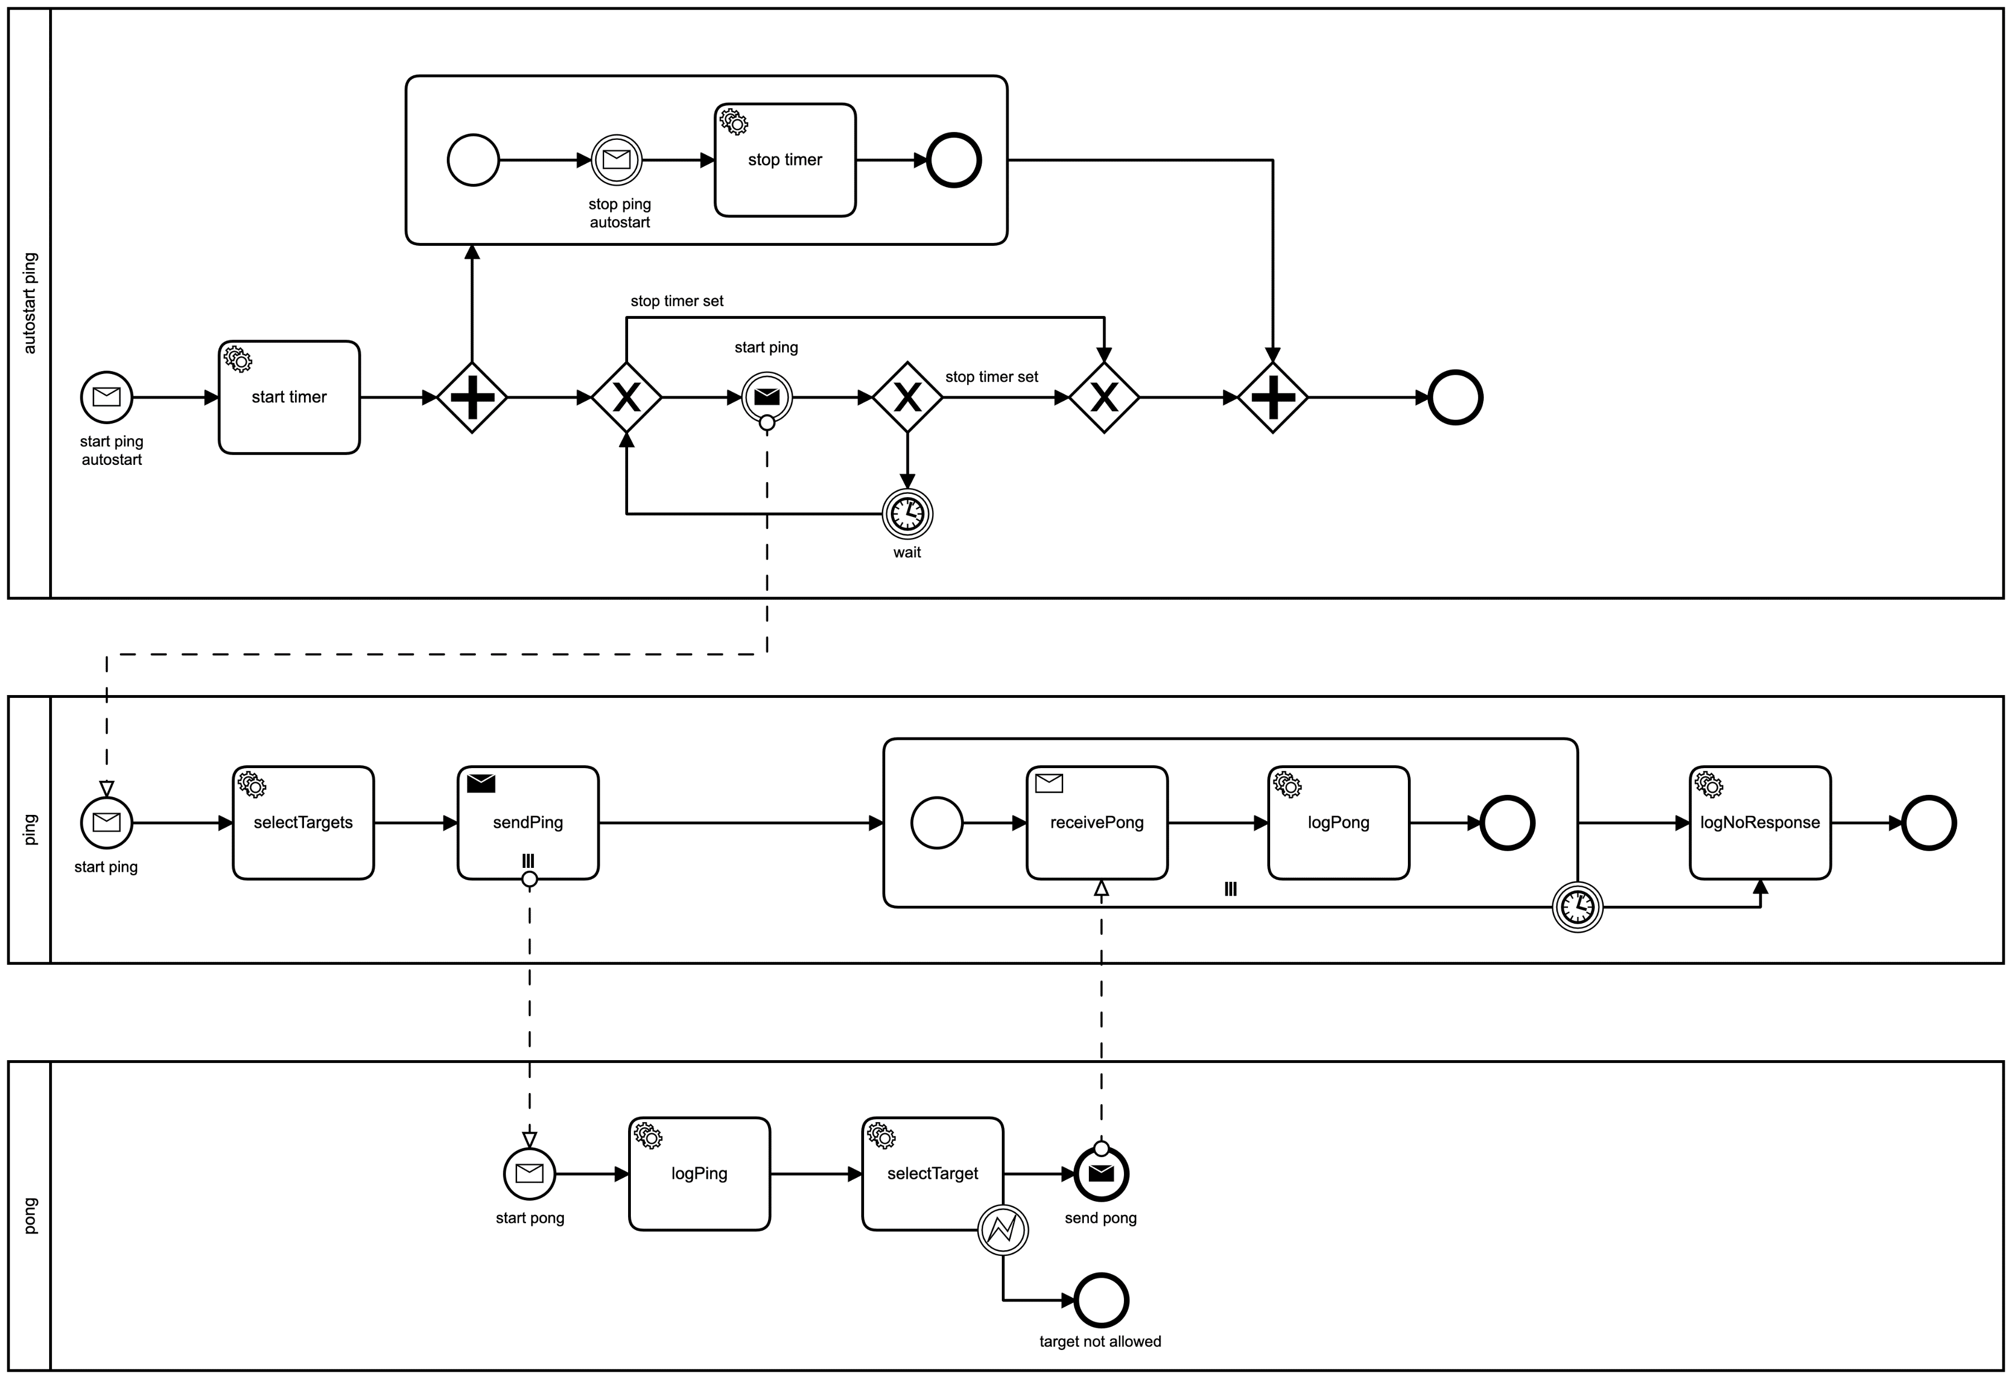 Example of a BPMN model (Ping-Pong-Process of the DSF)